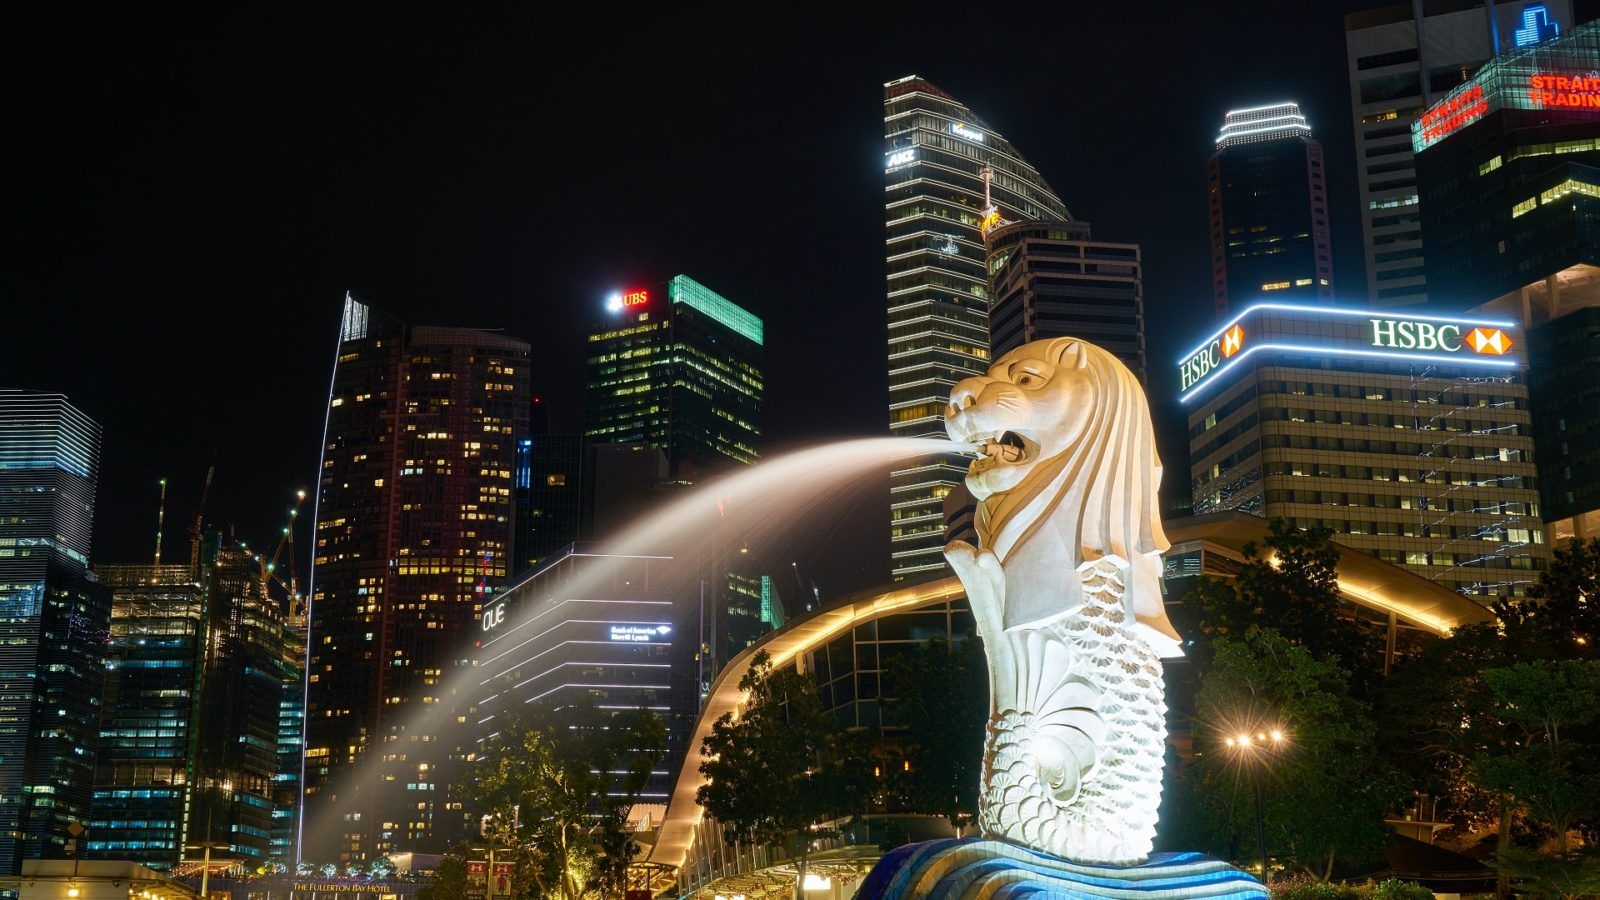 Singapore eases several COVID-19 rules starting 26 April